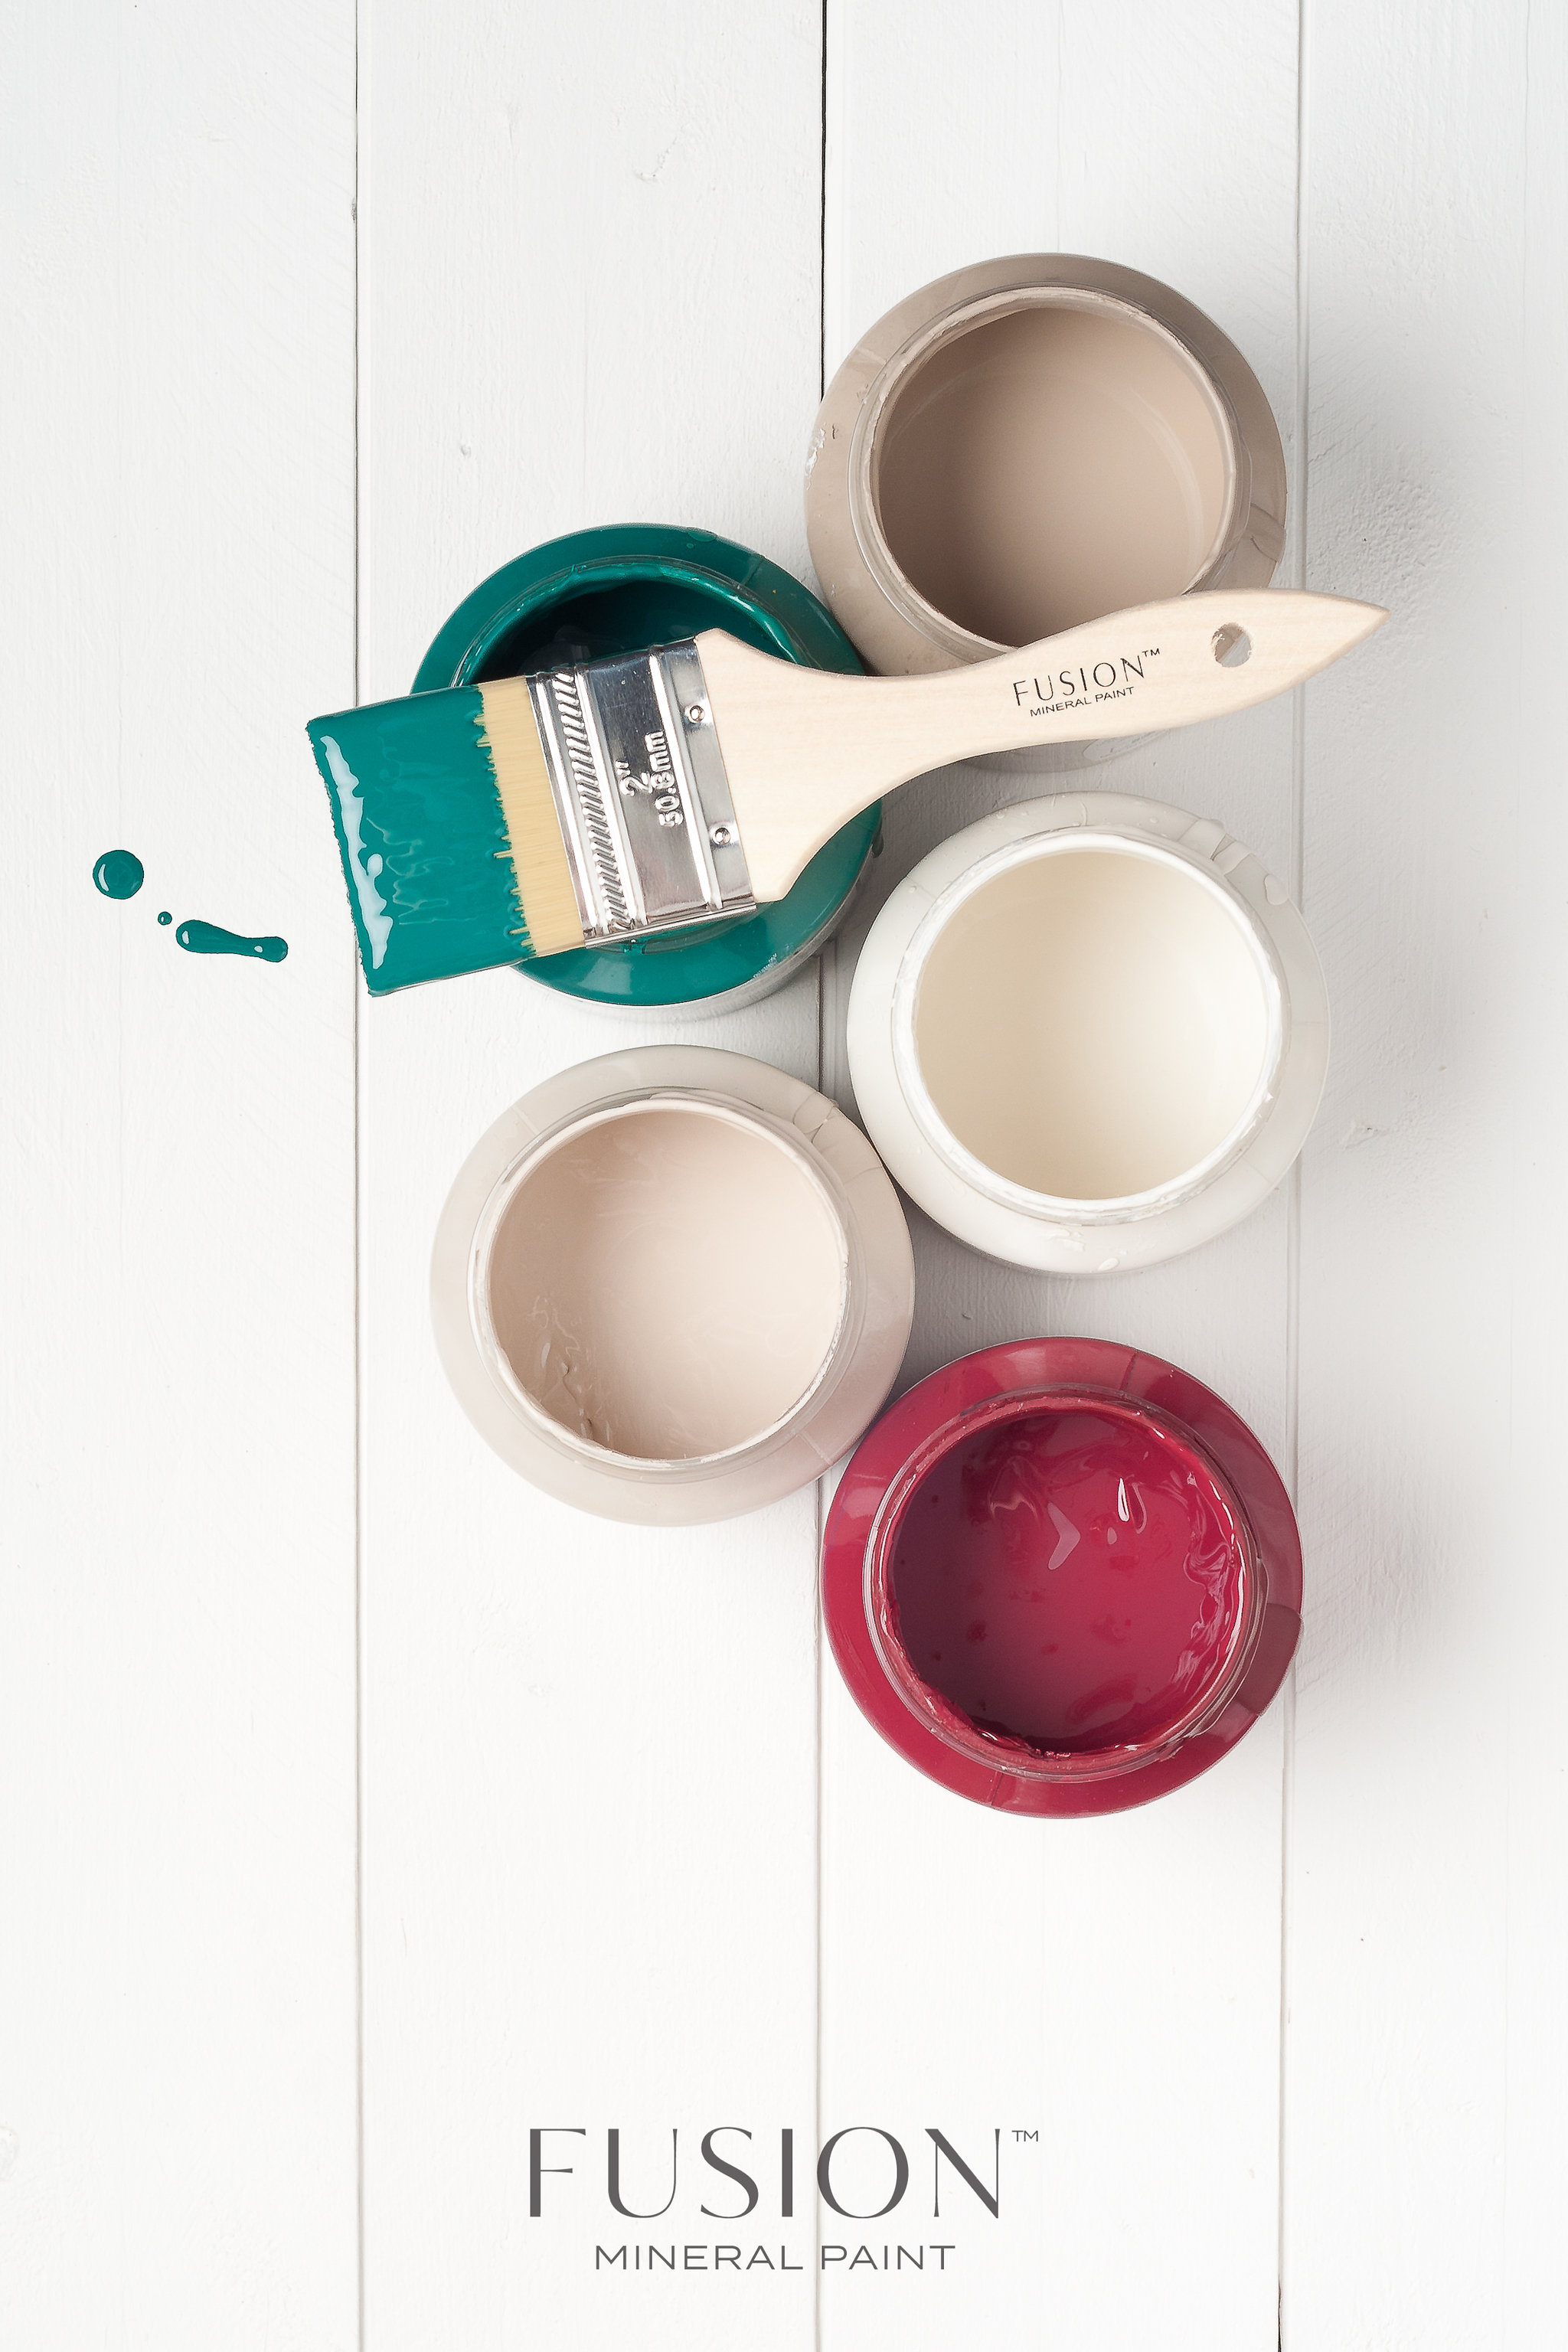 Cranberry fusion mineral paint Goed Gestyled Brielle